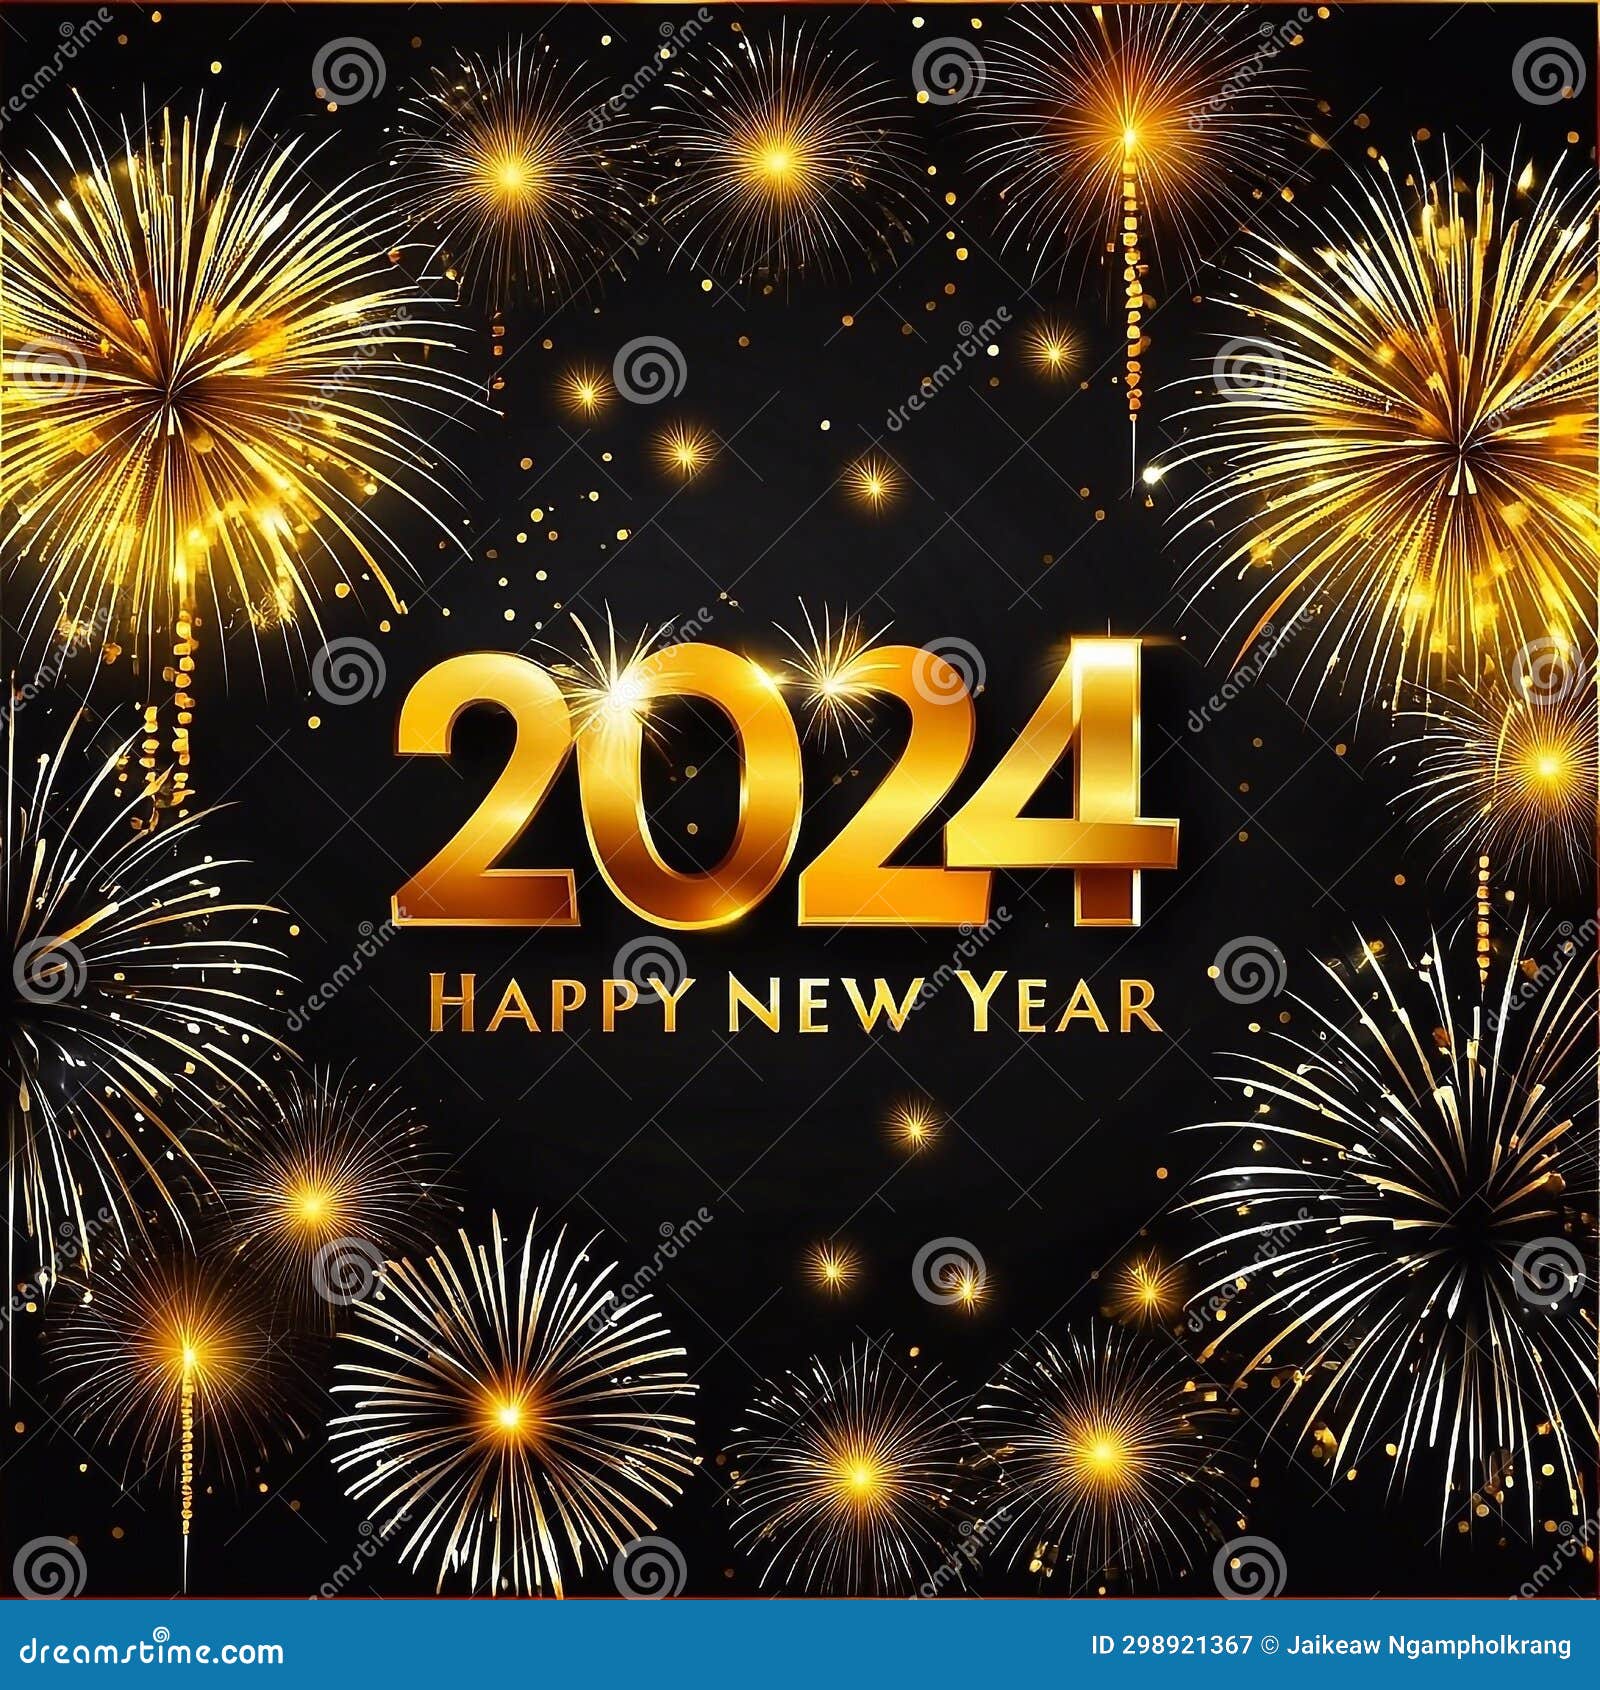 Happy New Year 2024 with Various Colors of Fireworks. Stock Image